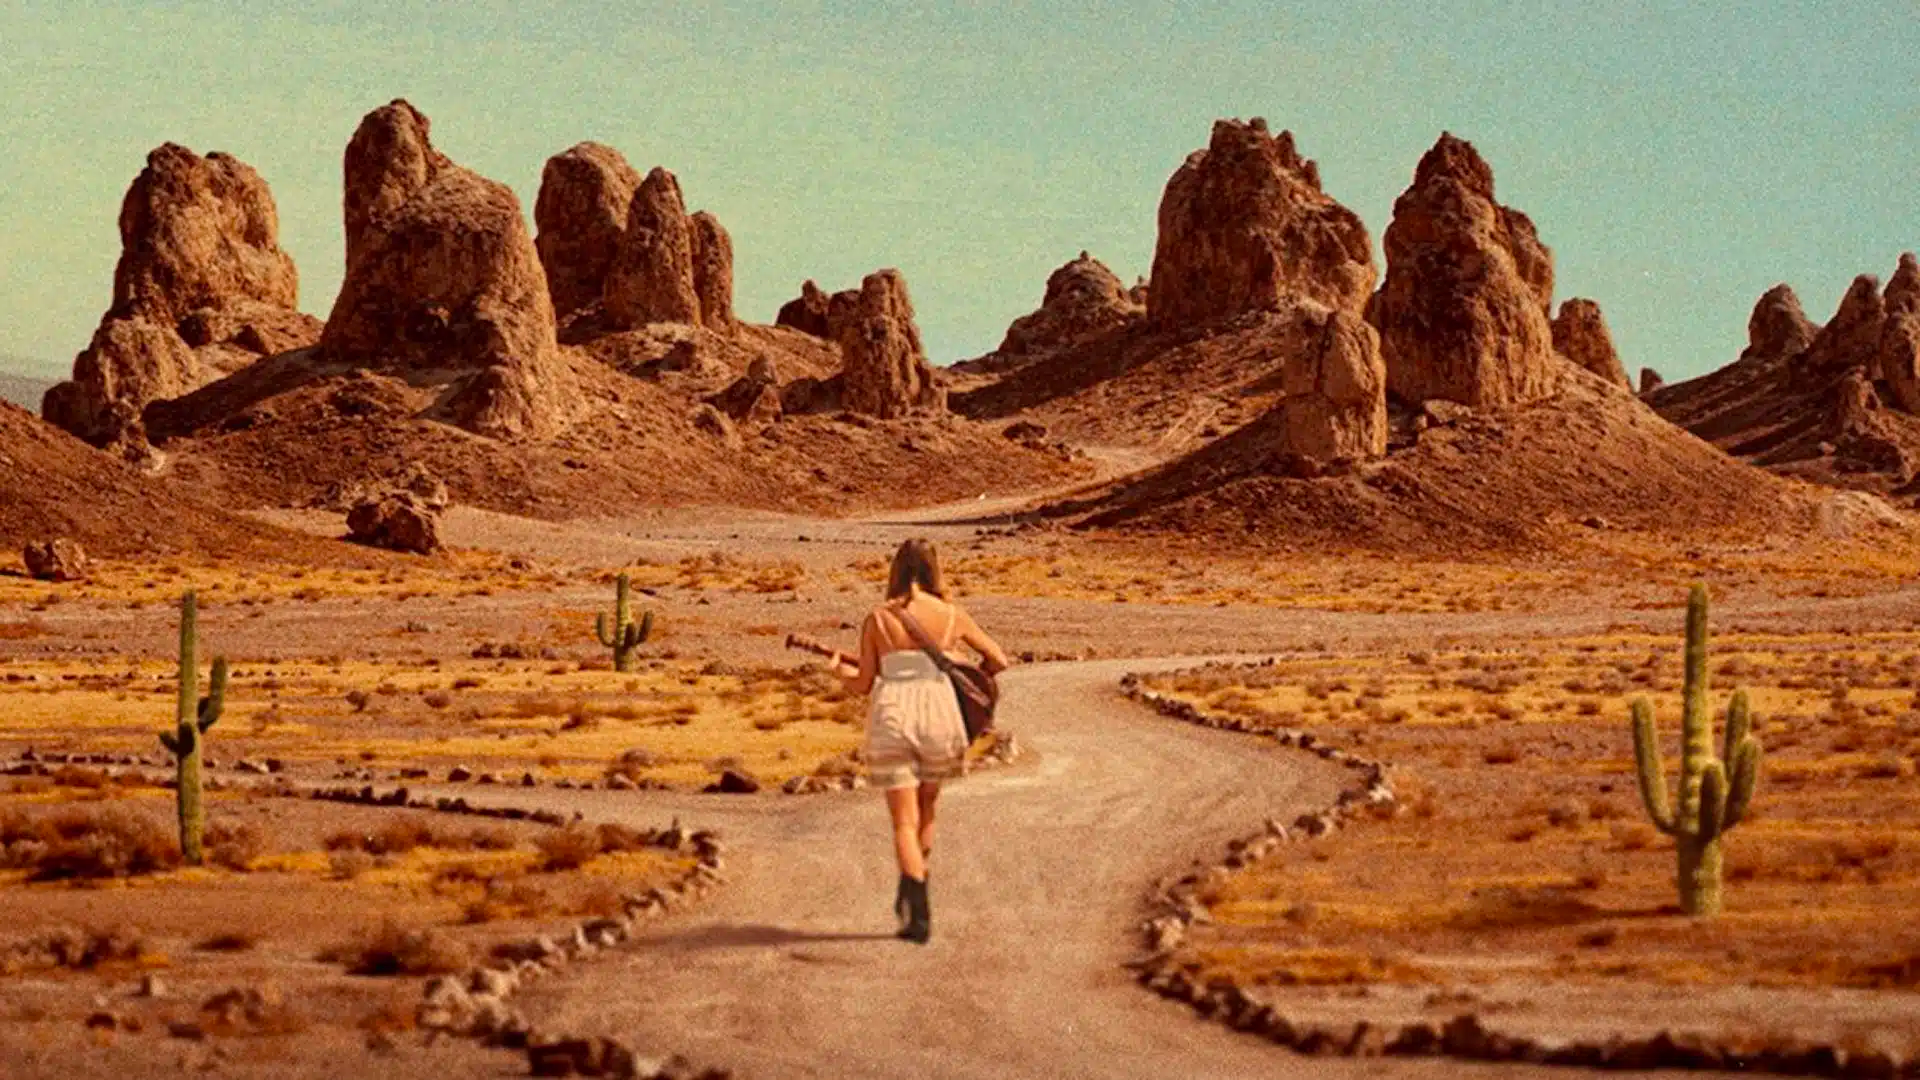 A woman is walking through a desert, holding a guitar, in The Outwaters. 